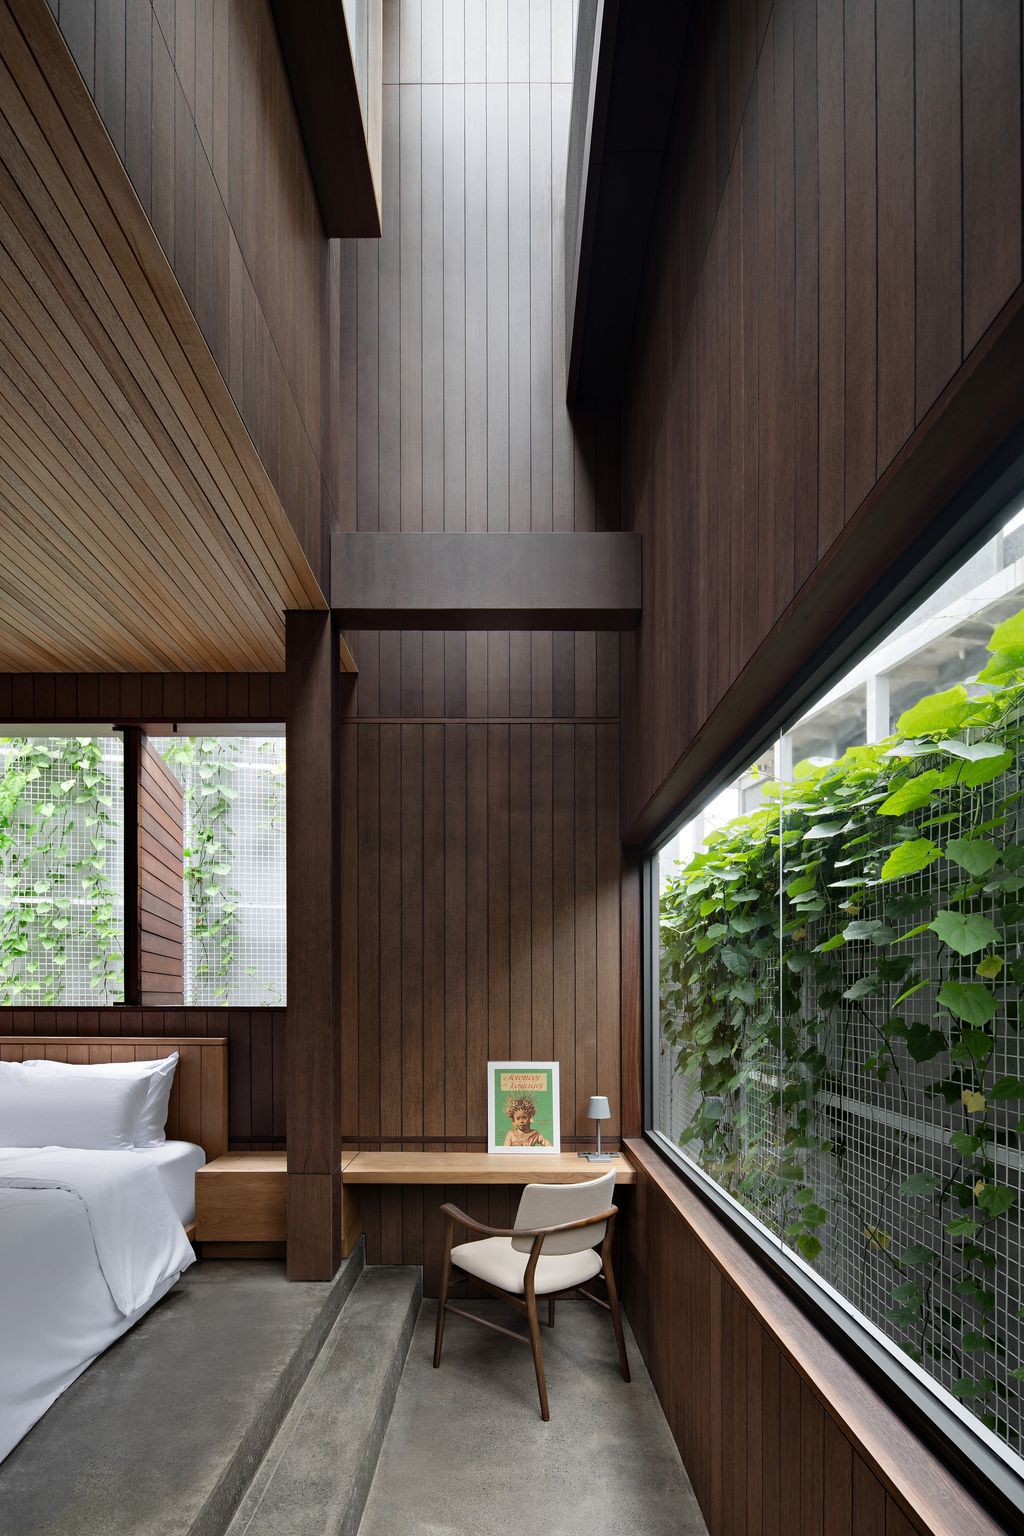 Villa Tanatakah in Indonesia Designed with Sustainability by Asimapra